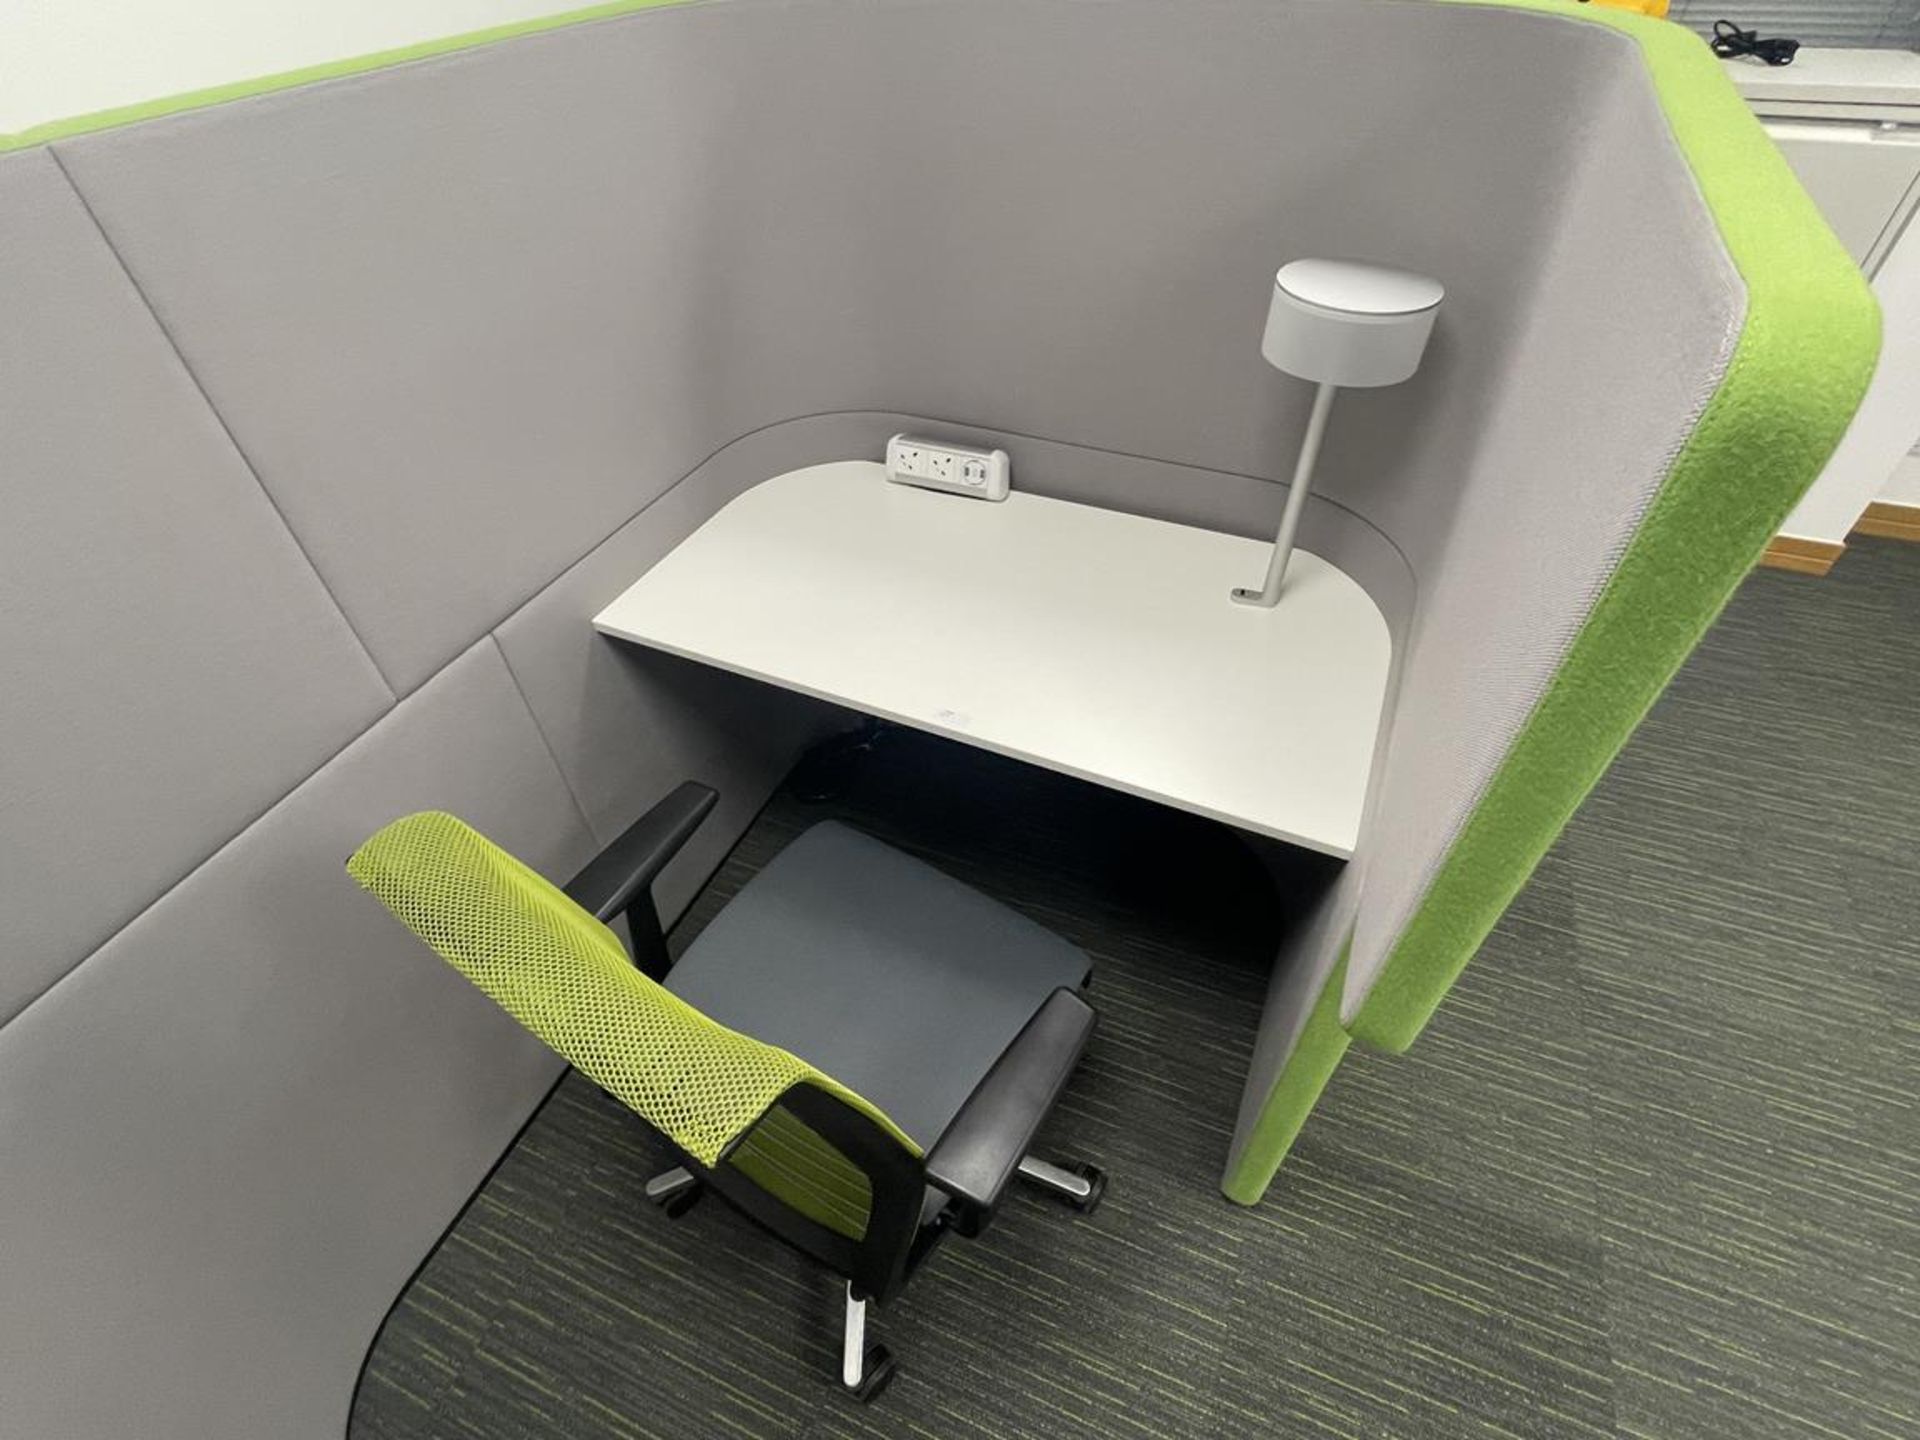 Bene Green/Grey Upholstered Privacy Desk Pod with Swivel Chair, Lamp and Desk Power (GB REF#134) - Image 3 of 3